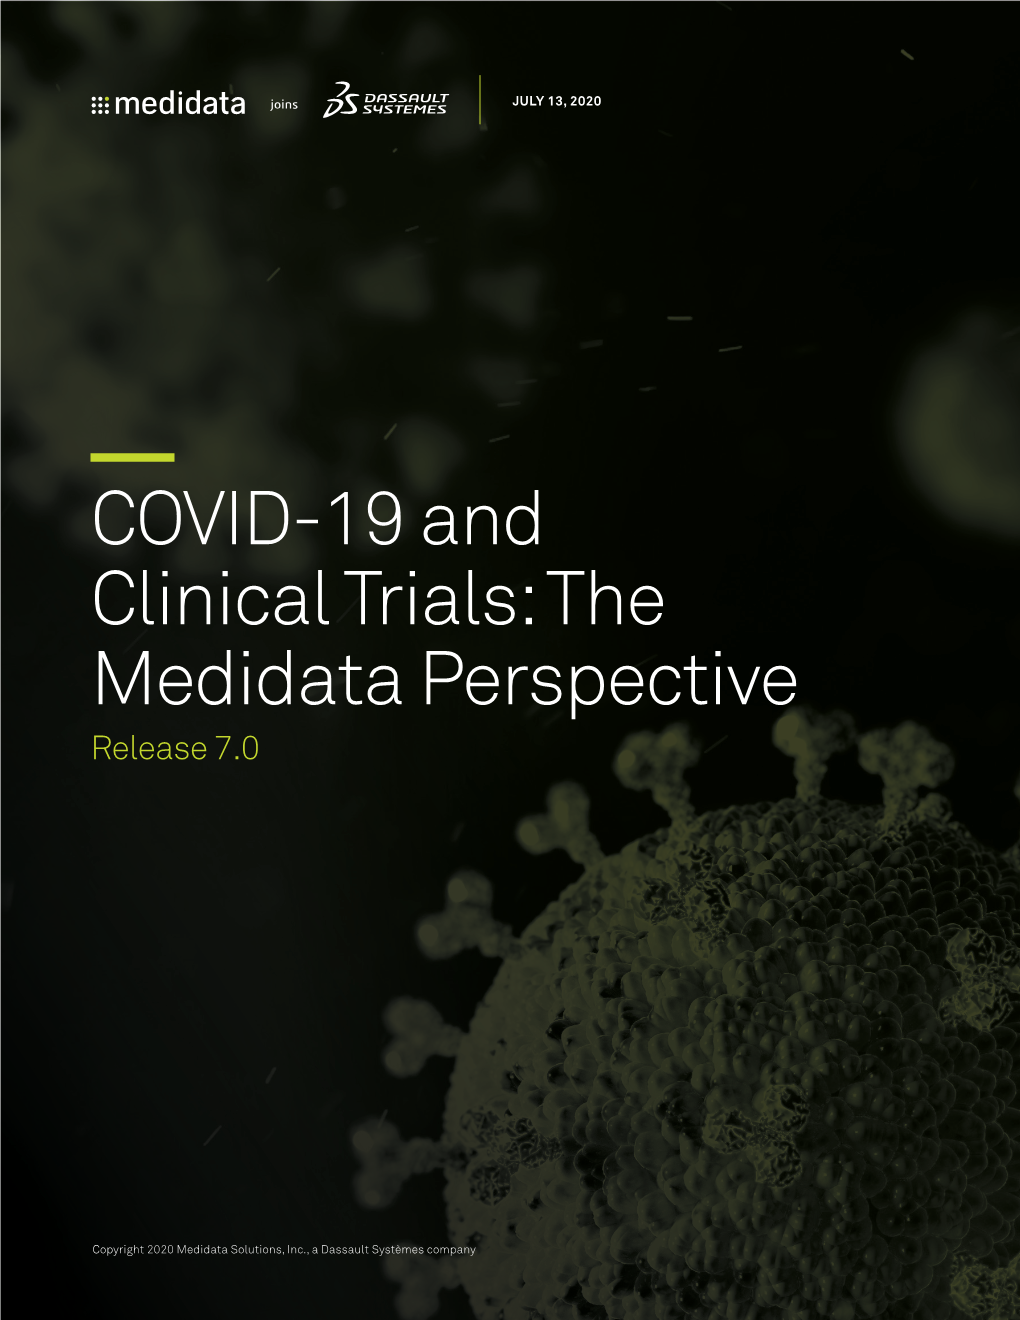 COVID-19 and Clinical Trials: the Medidata Perspective Release 7.0